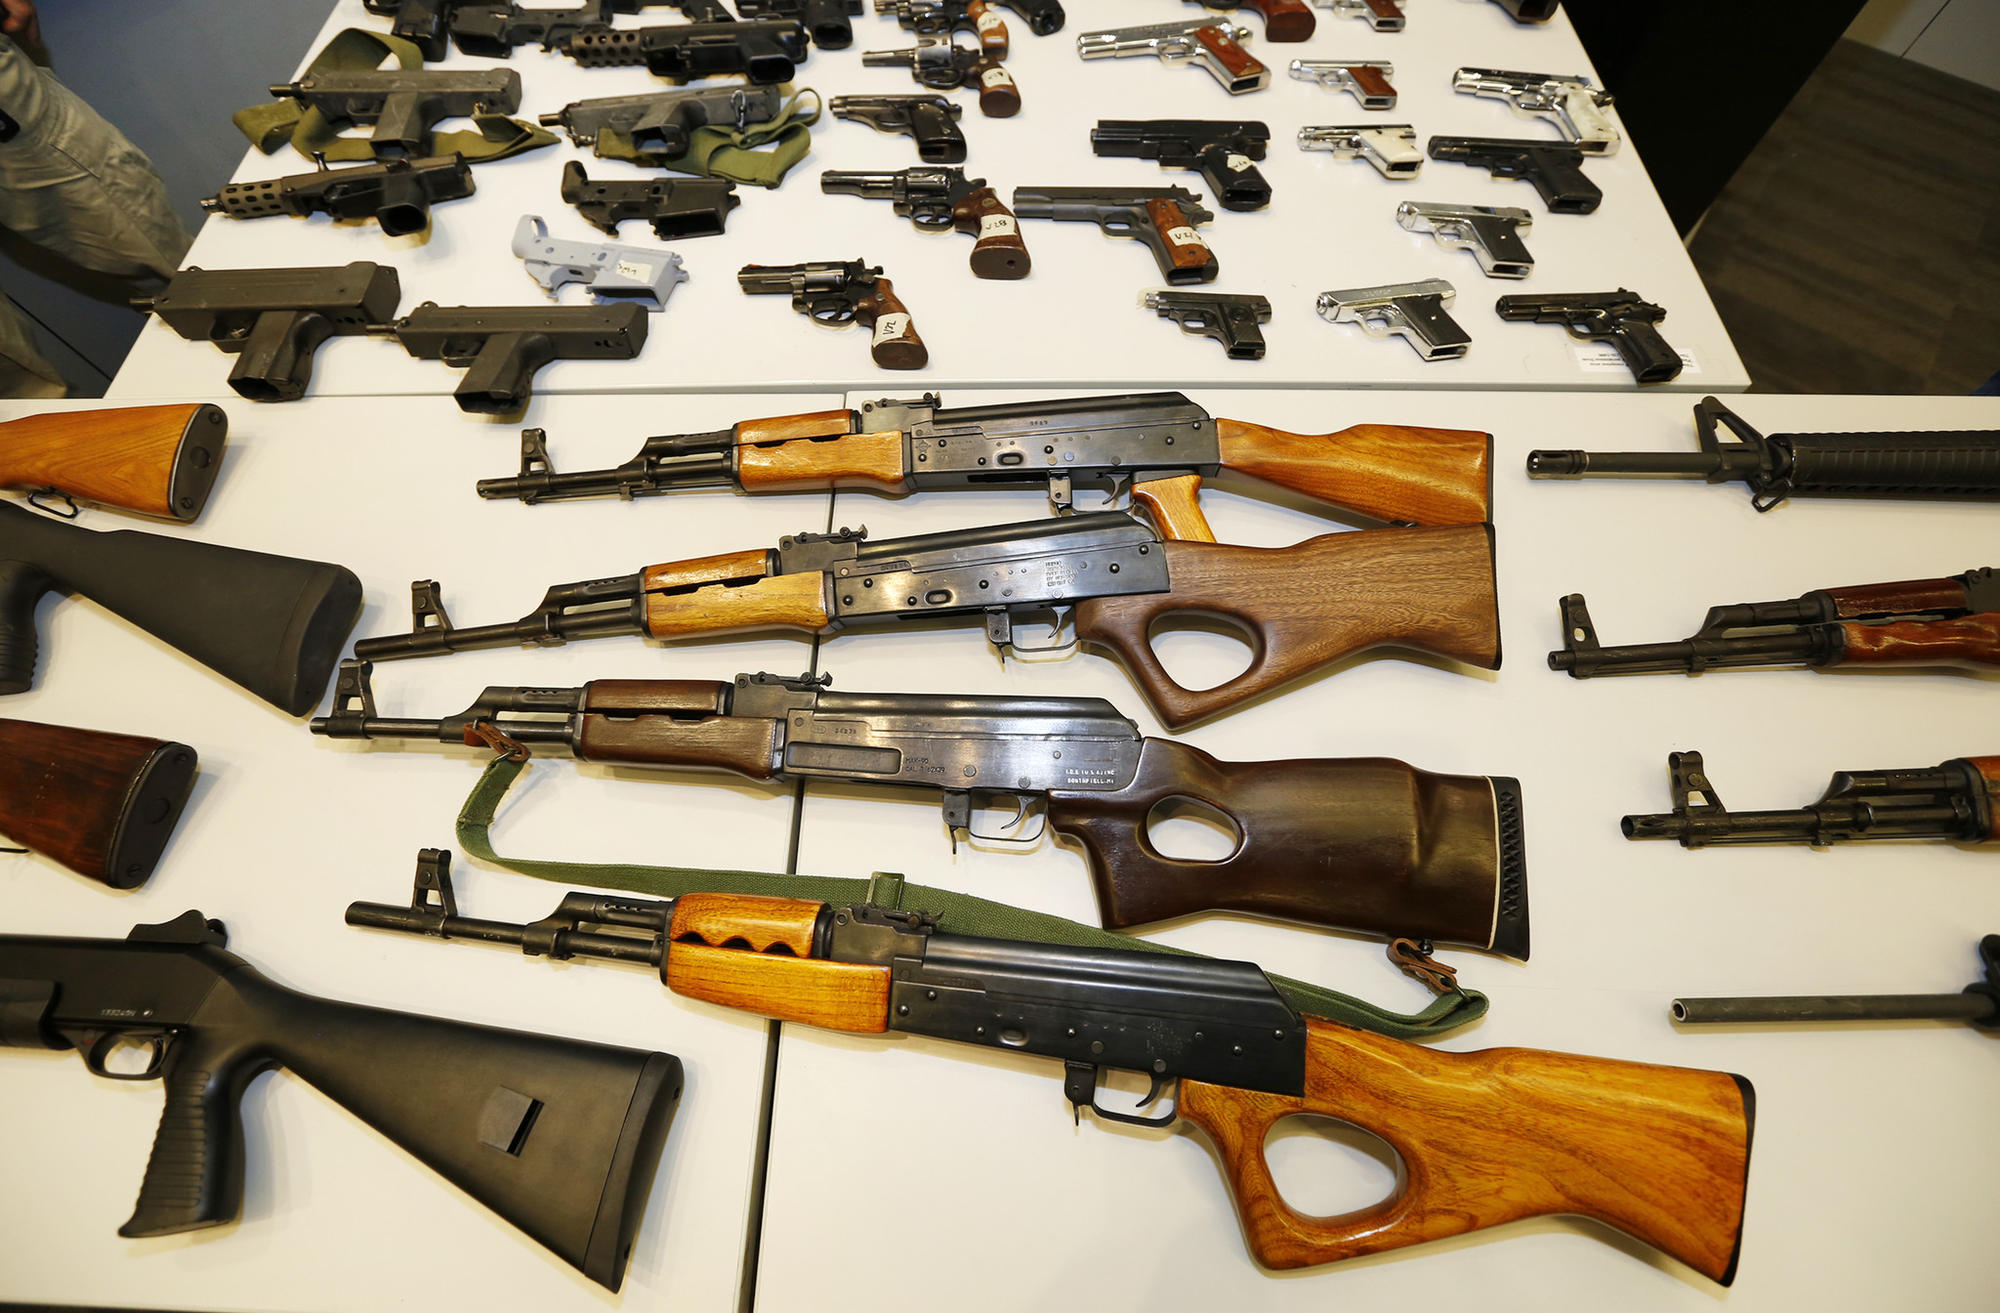 The Los Angeles Police Department displays weapons collected during a daylong gun buyback program in May.